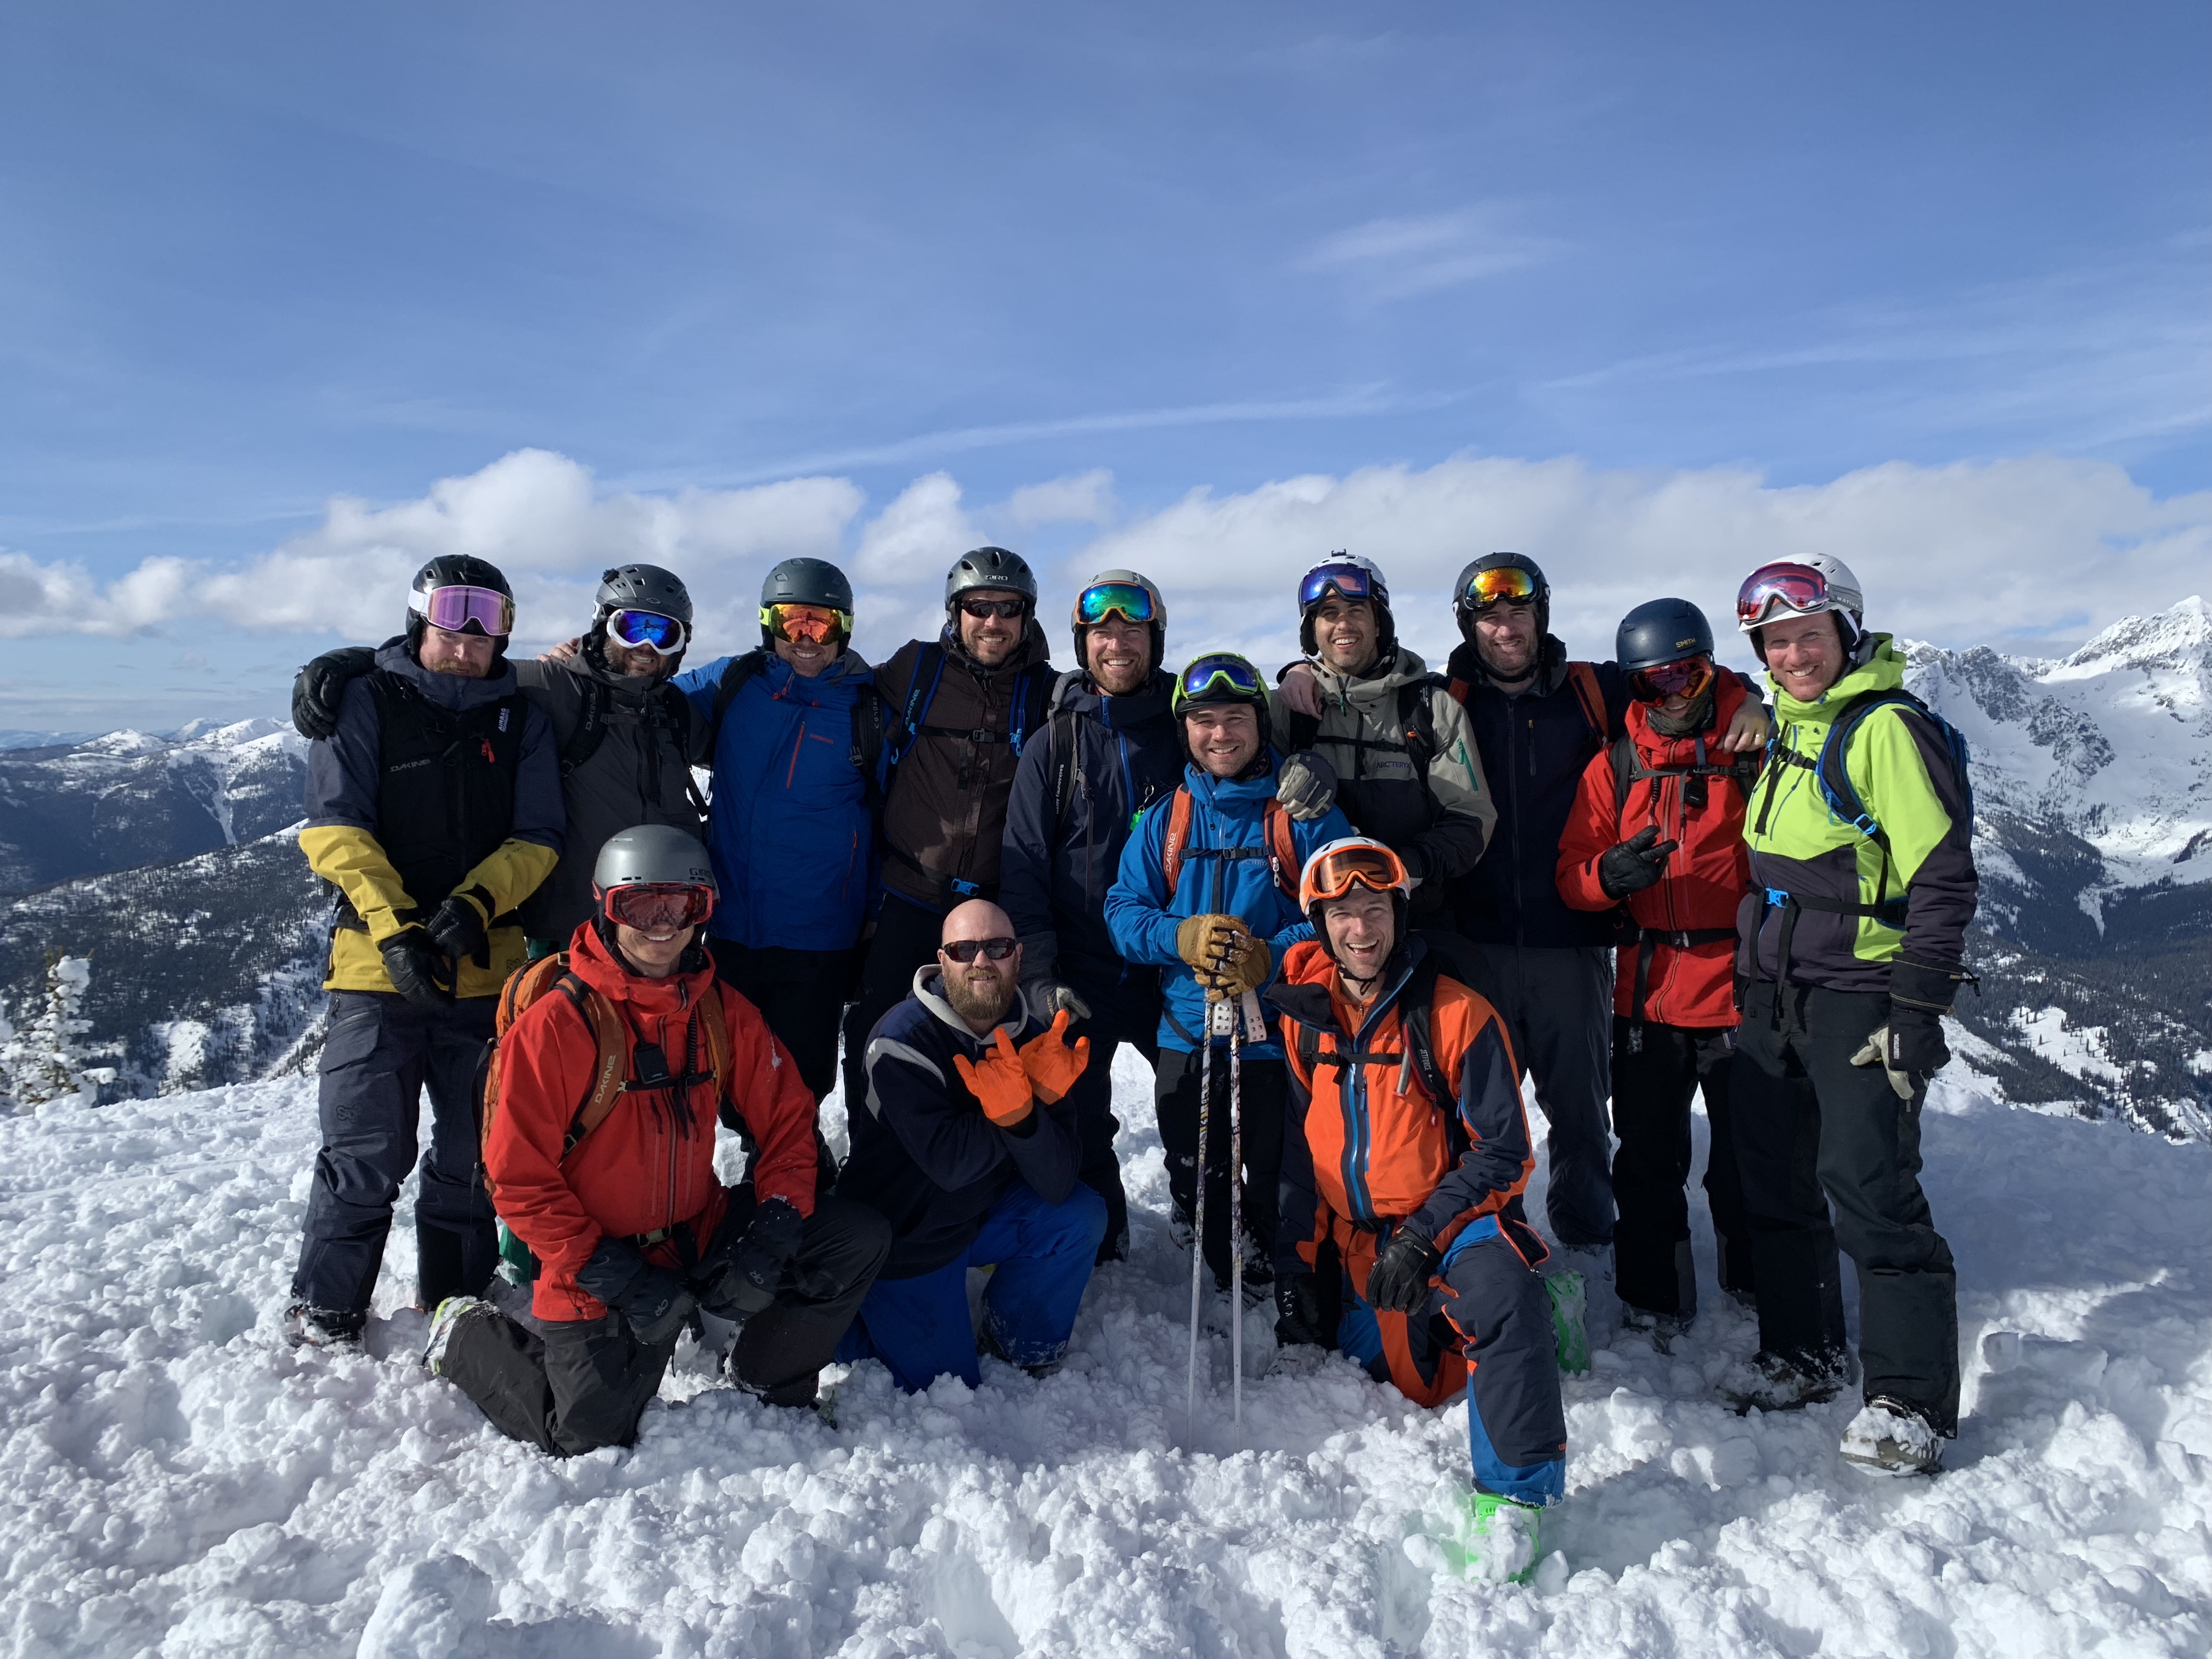 Group of skiers at Retallack